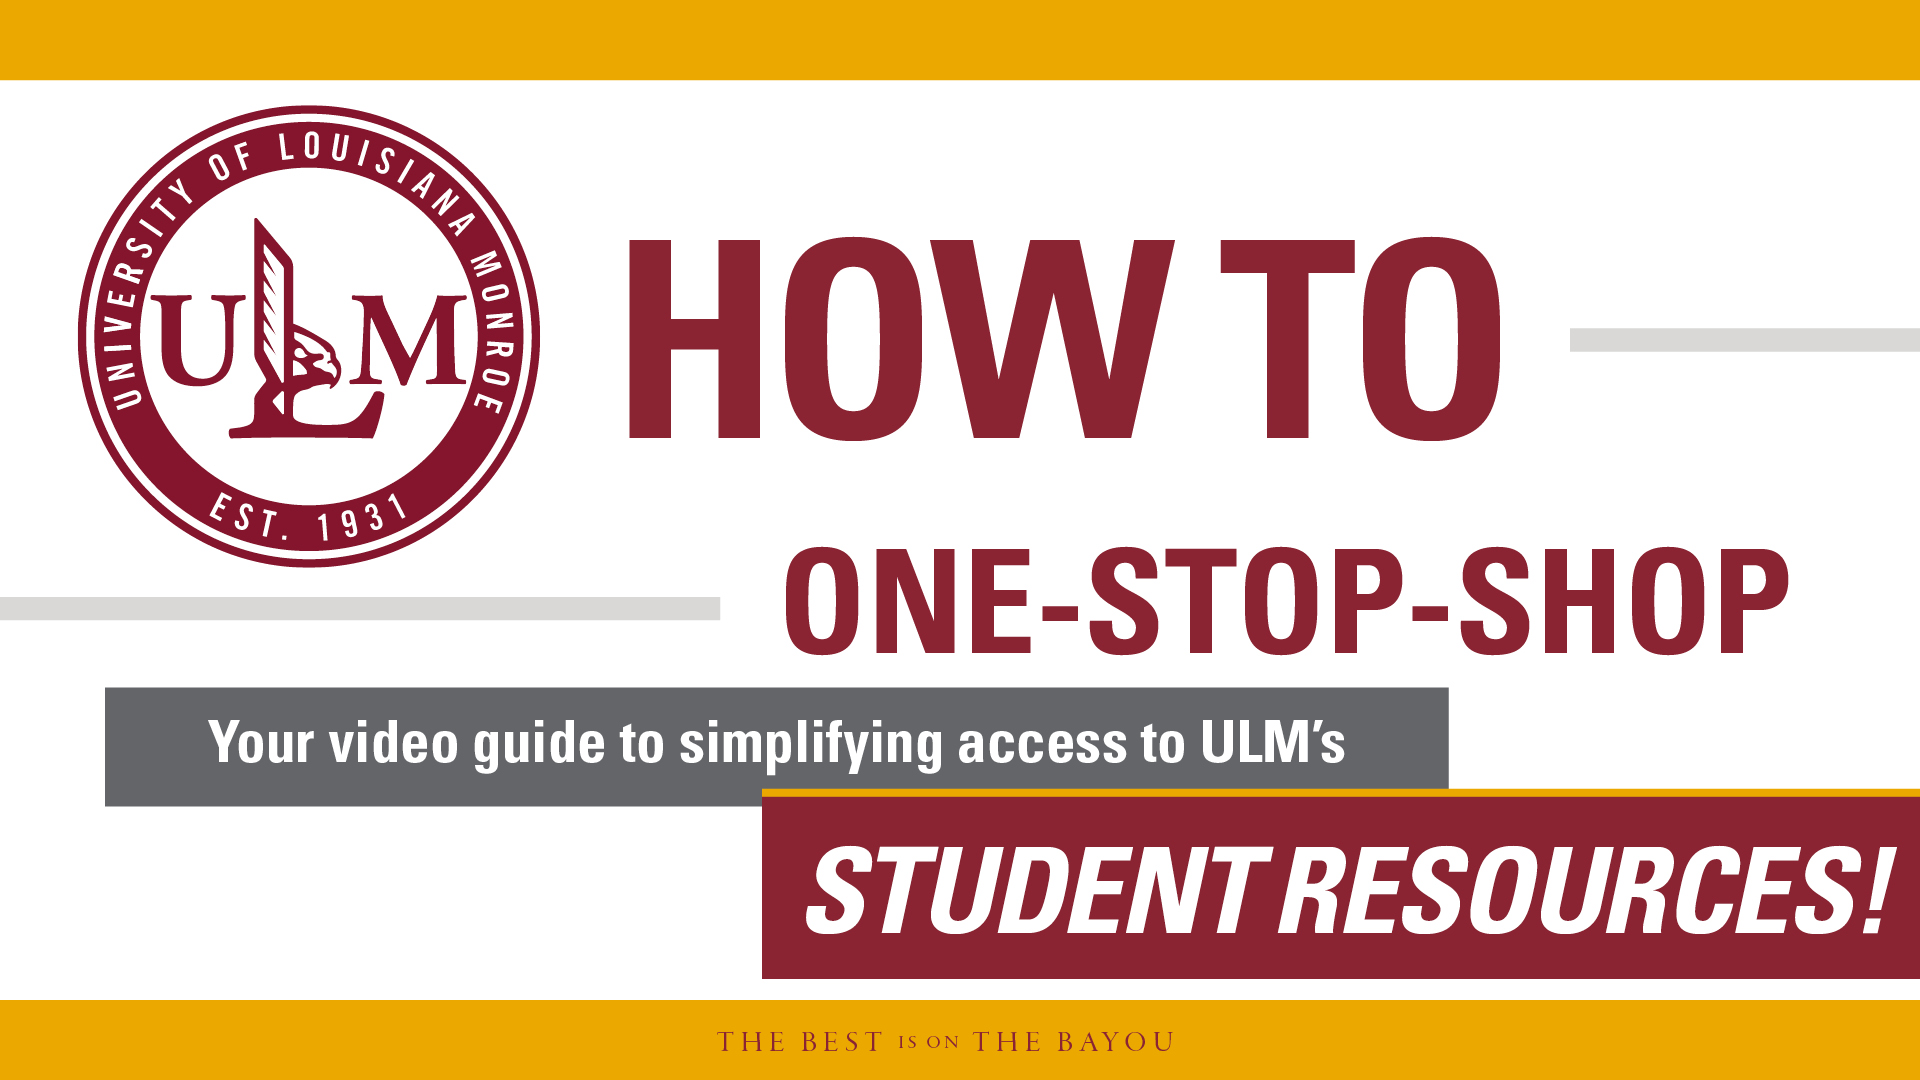 ULM's How To banner ad